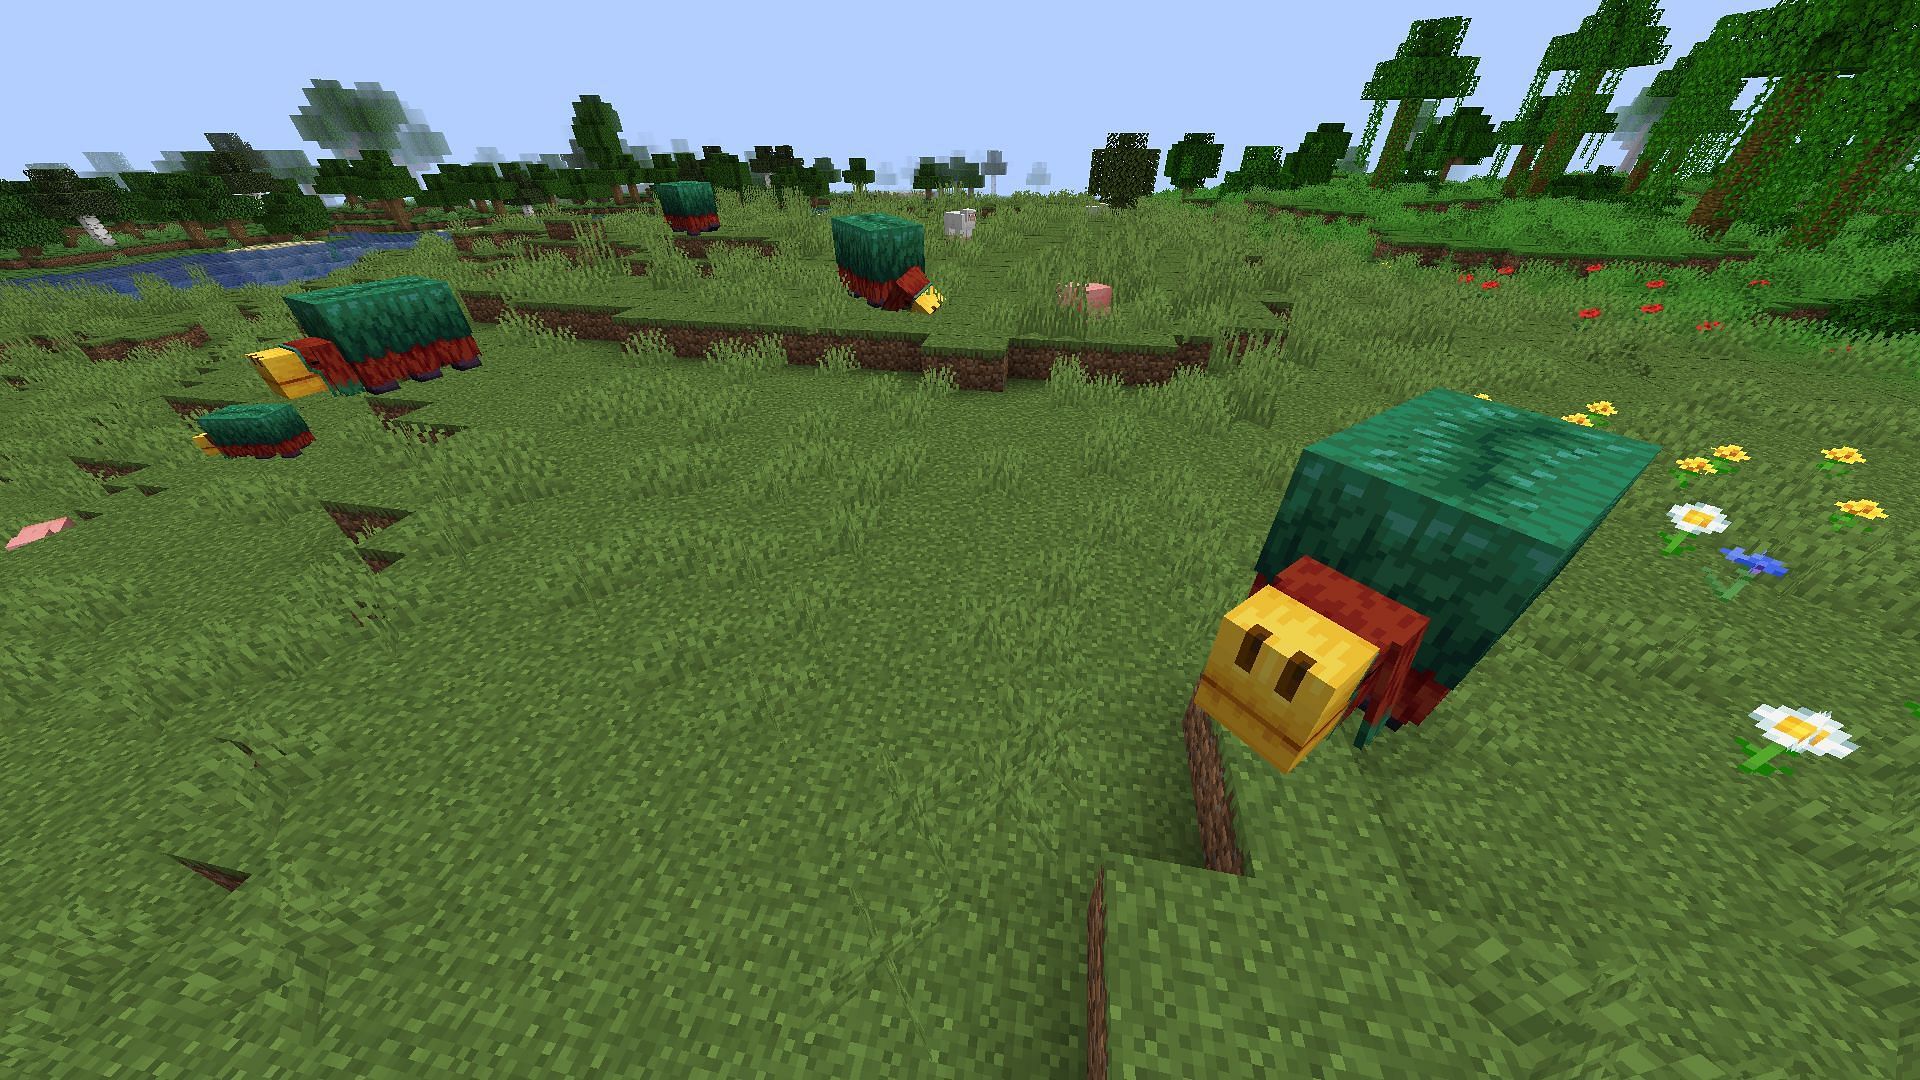 Sniffers are the first ancient mob that looks quite like a dinosaur in Minecraft 1.20 update (Image via Mojang)